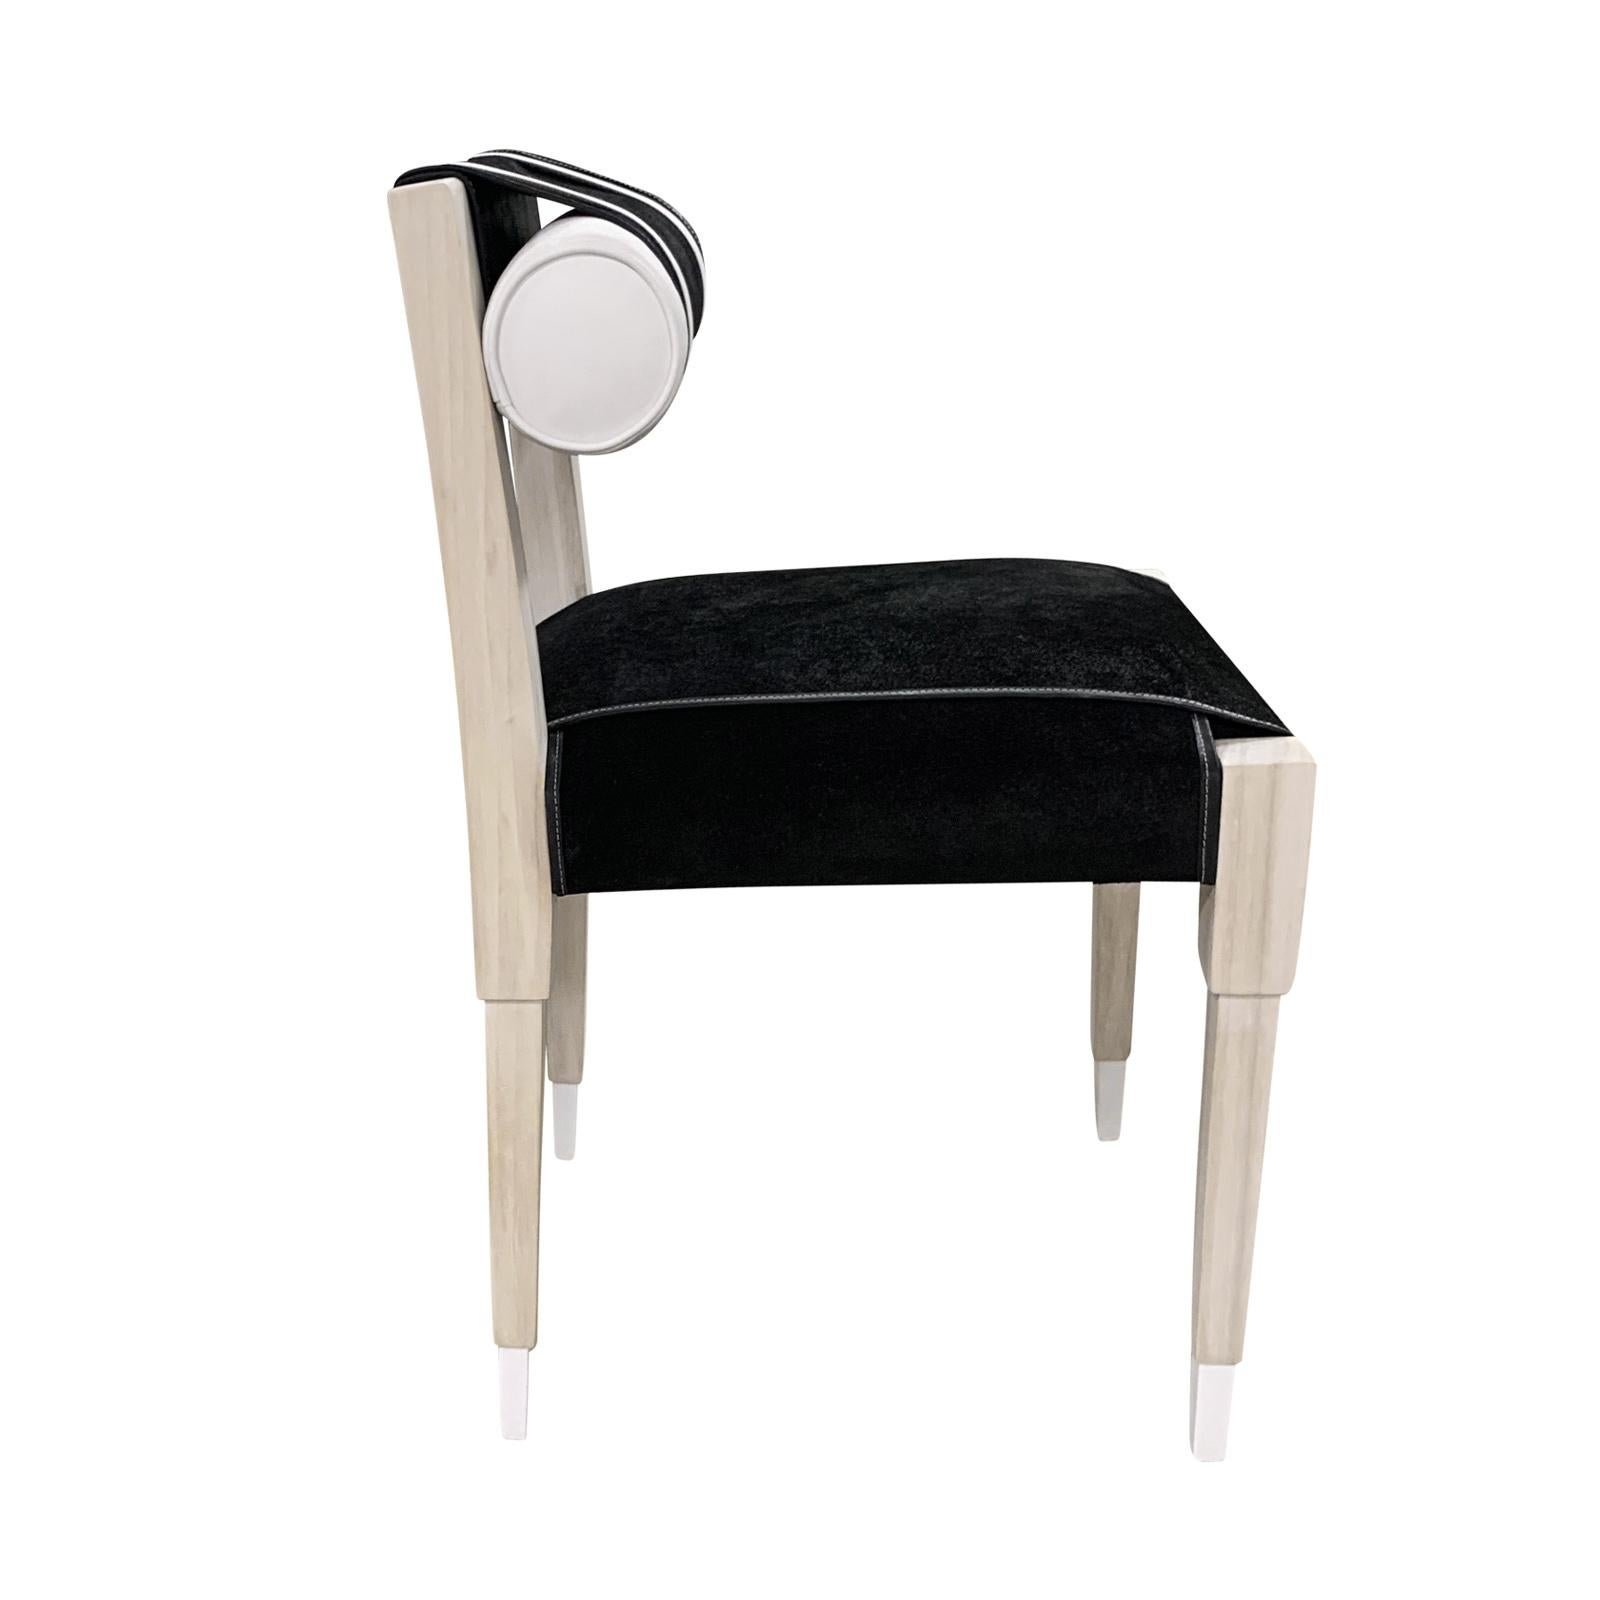 Chic profile and style define the chair N°5. This beautiful chair combines a bleached oak frame with the most beautiful black suede + white vinyl straps (also available in real leather). Custom sizes available!